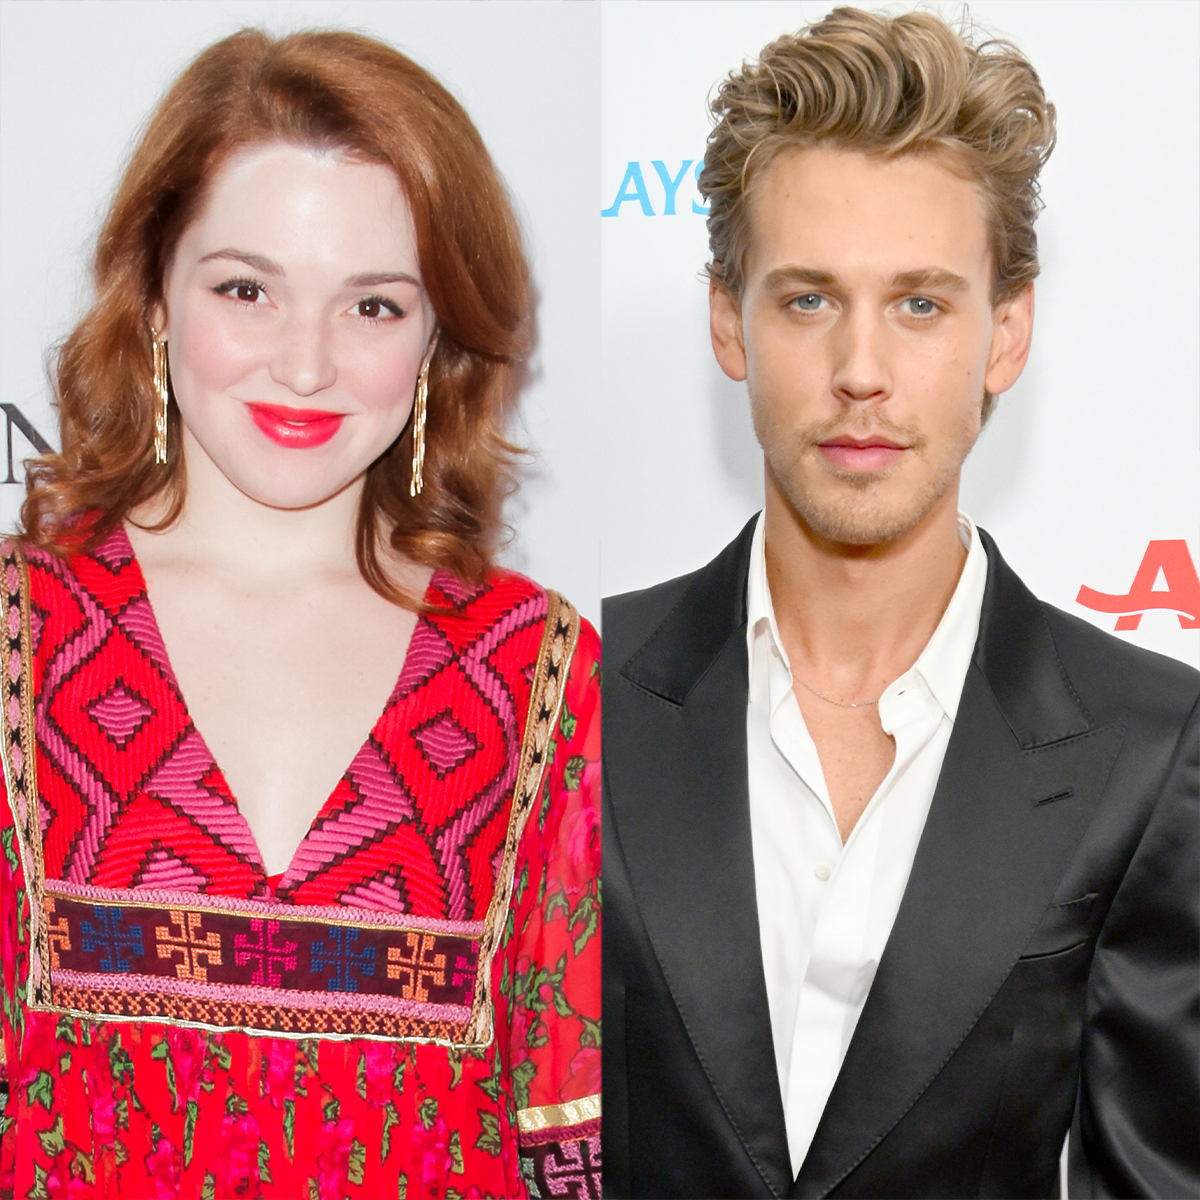 Wizards of Waverly Place’s Jennifer Stone Recalls “Date” With Co-Star Austin Butler – E! Online